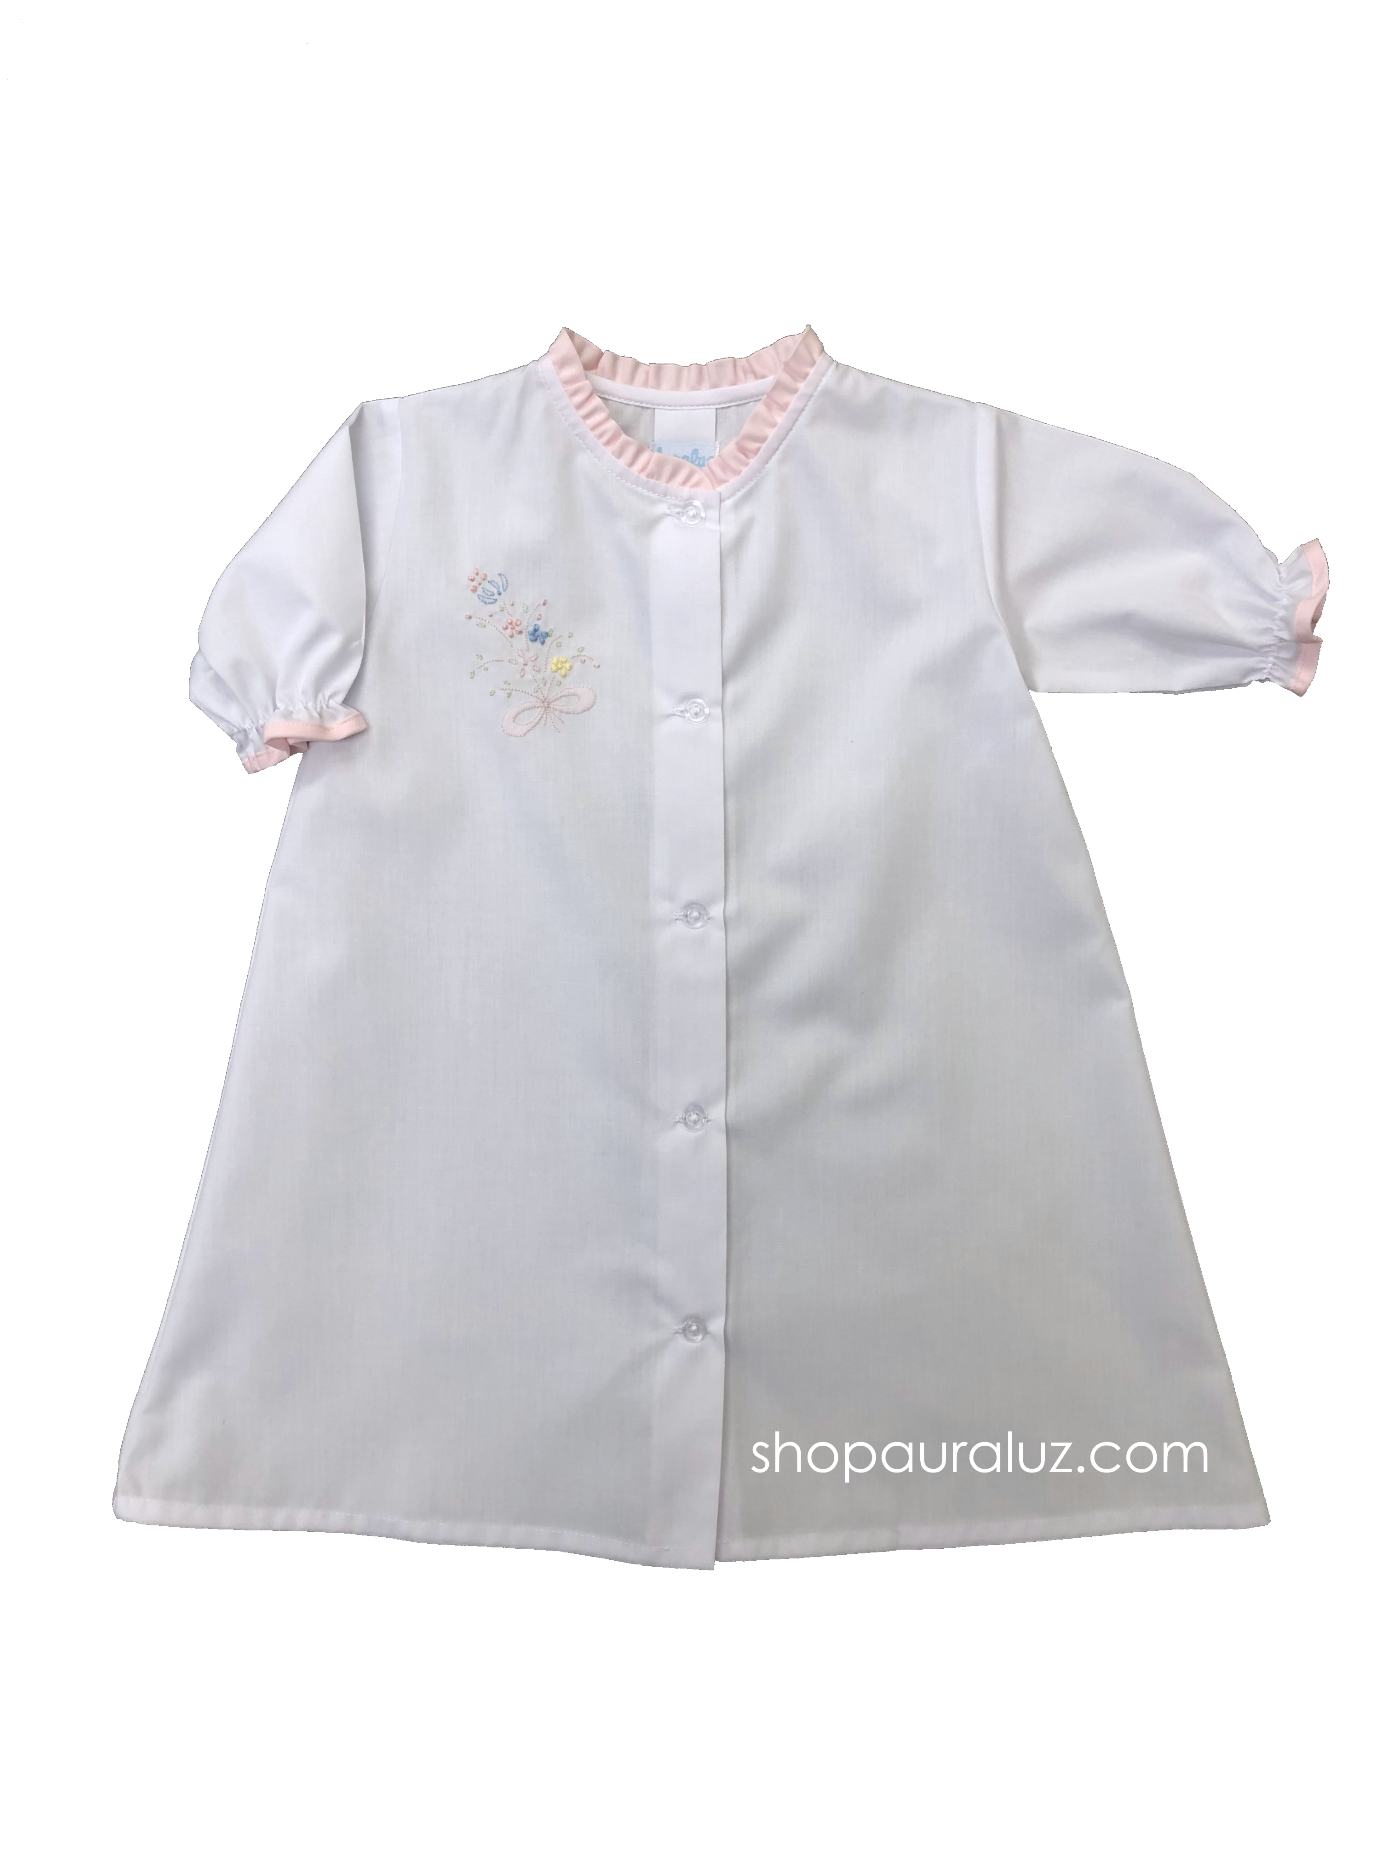 Auraluz Girl Day Gown, l/s...White with pink ruffle trim and embroidered bouquet flowers